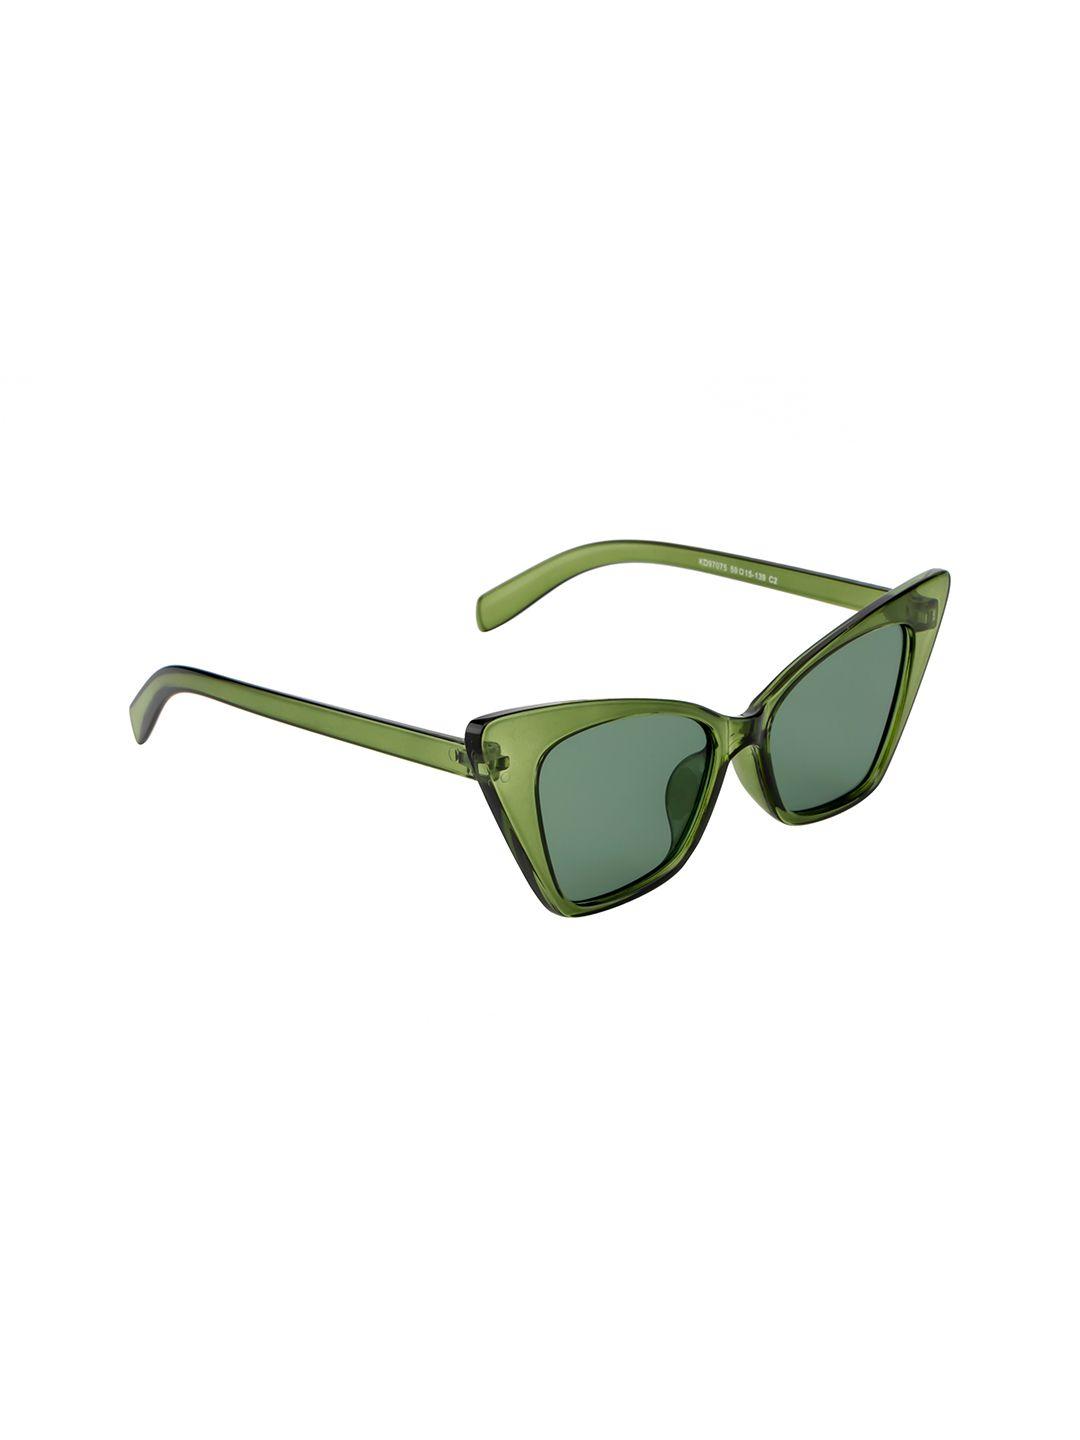 ted smith women green lens & green cateye sunglasses with uv protected lens